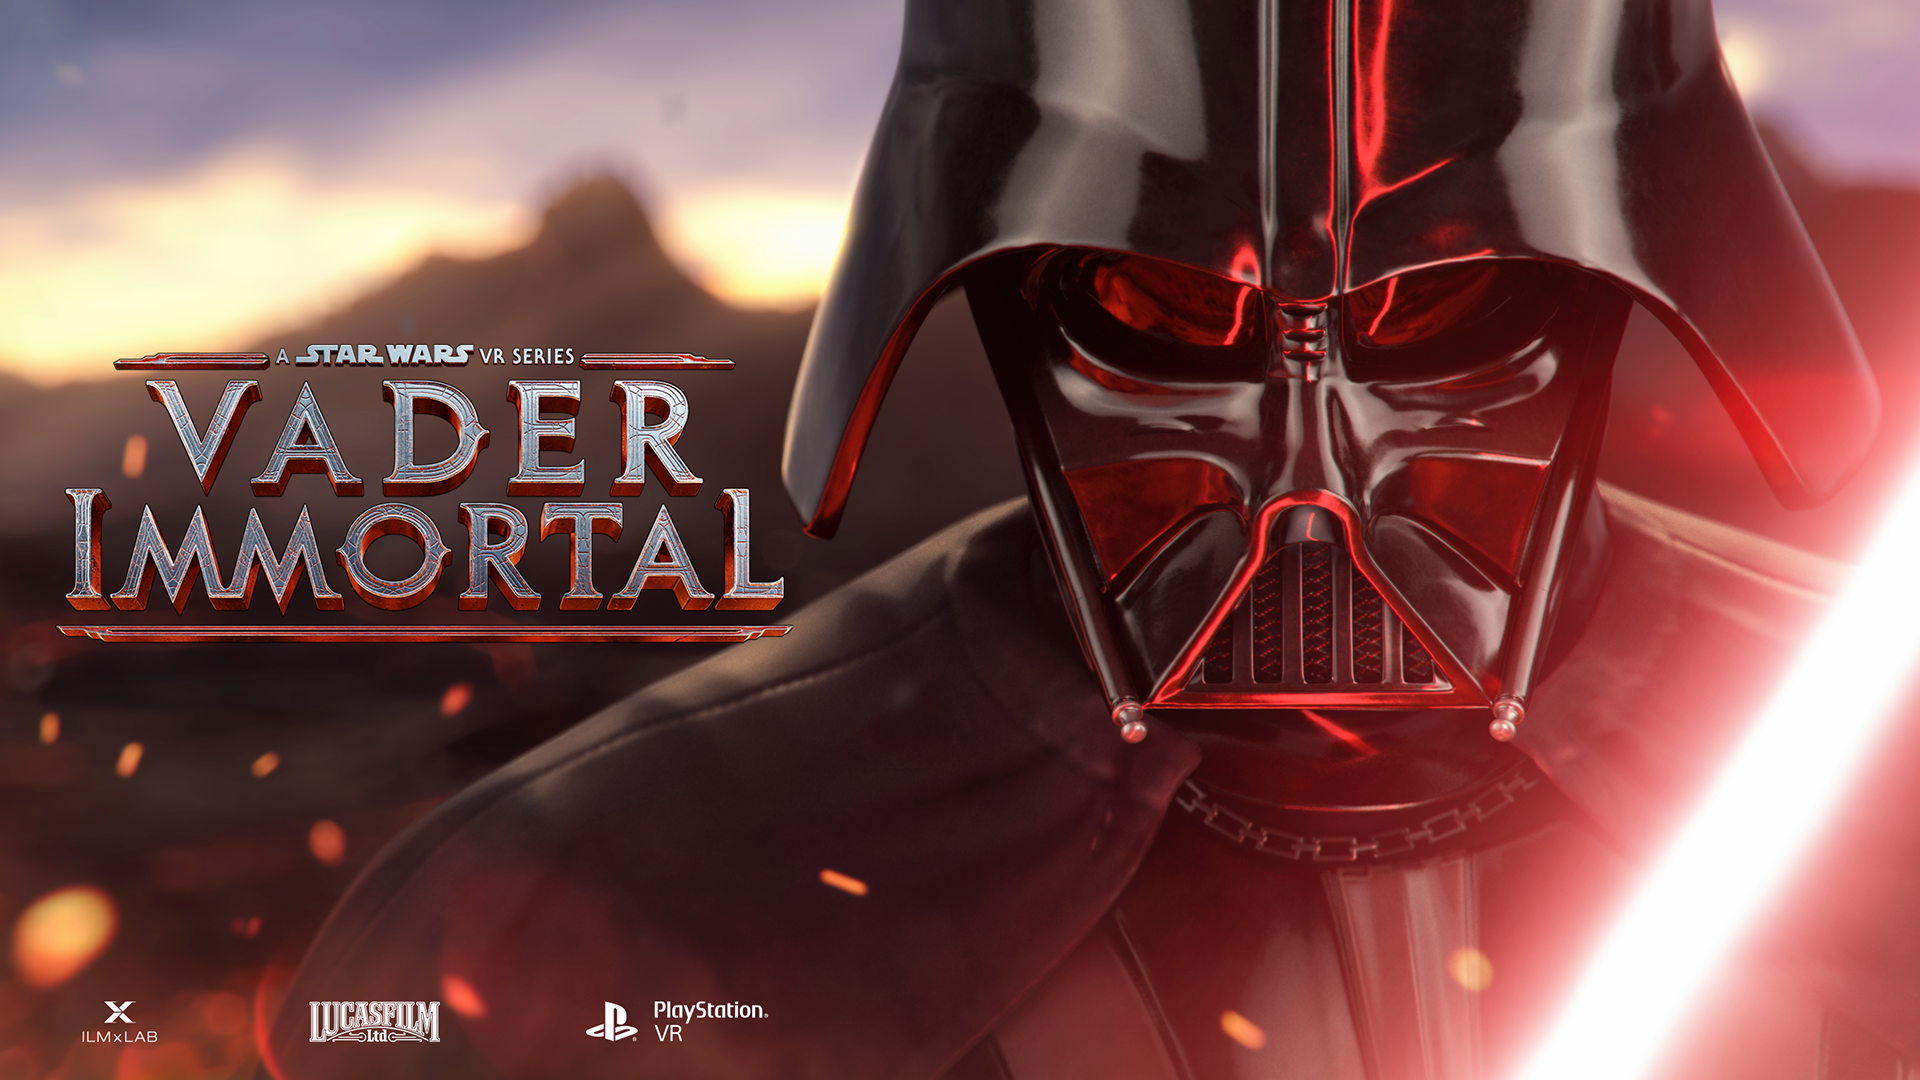 Vader Immortal: A Star Wars VR Series Coming to PlayStation VR This Month